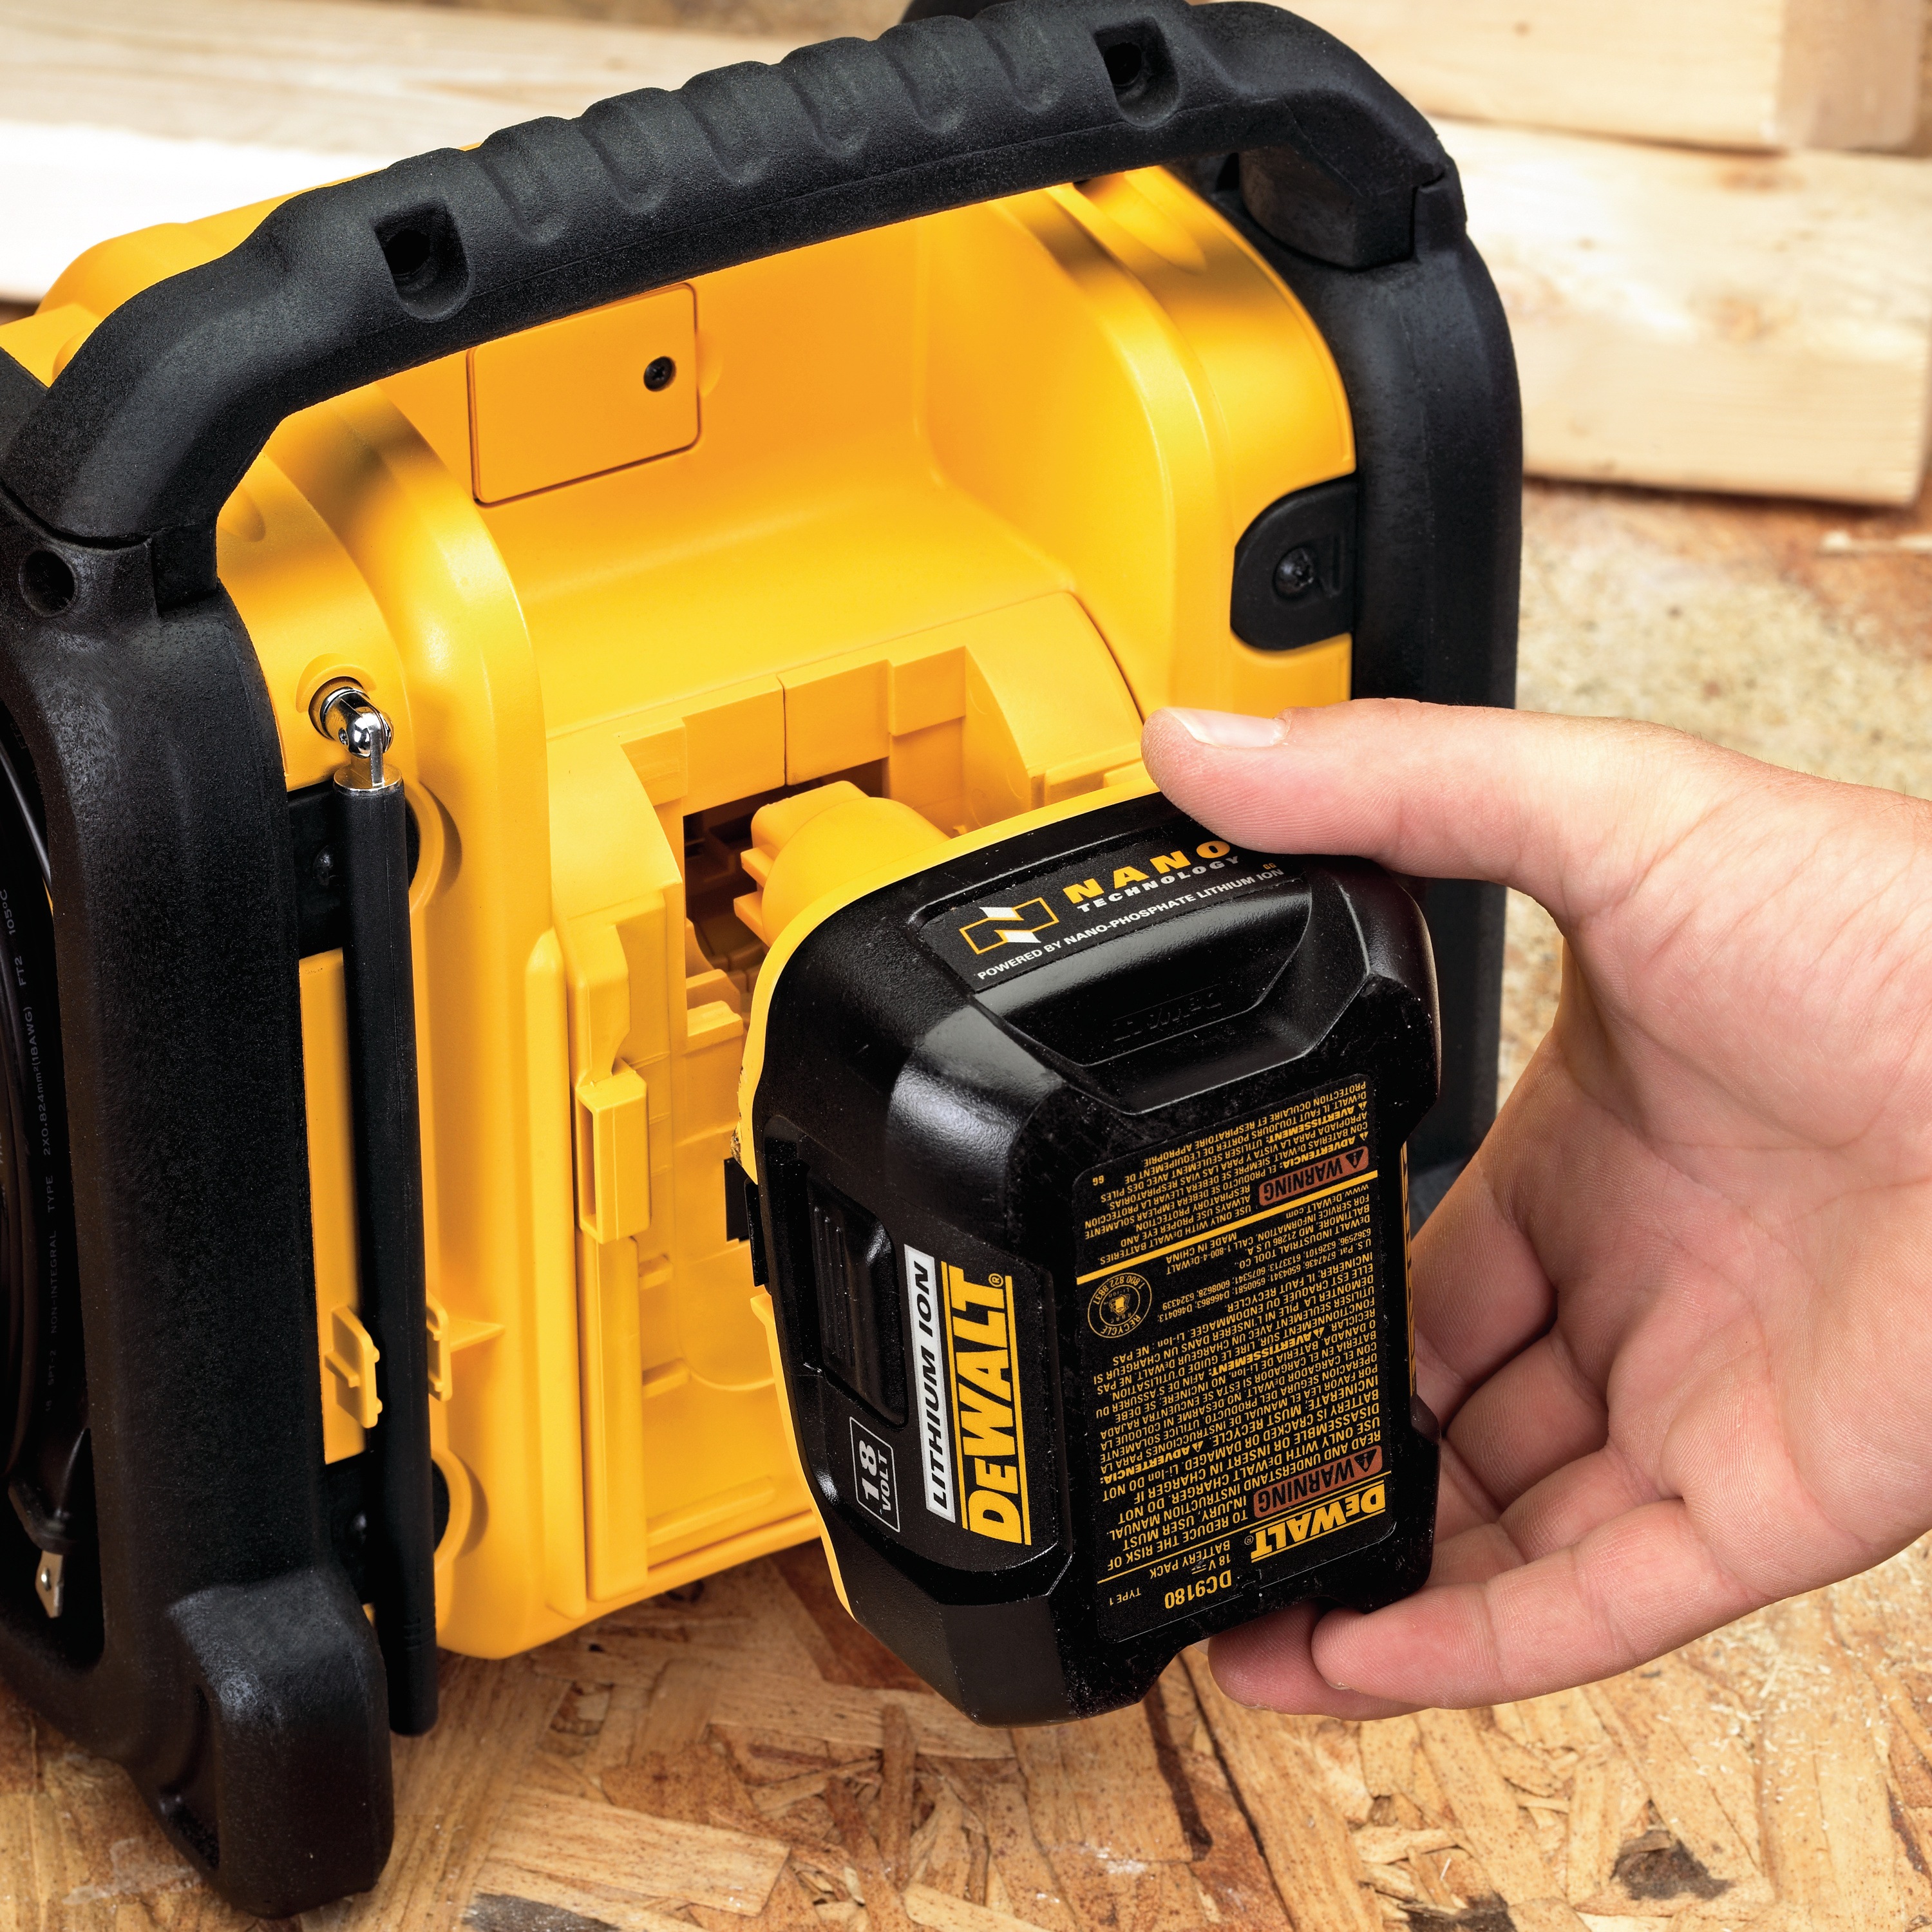 18 volts NiCad/Lithium Ion power battery feature of Compact Worksite Radio.